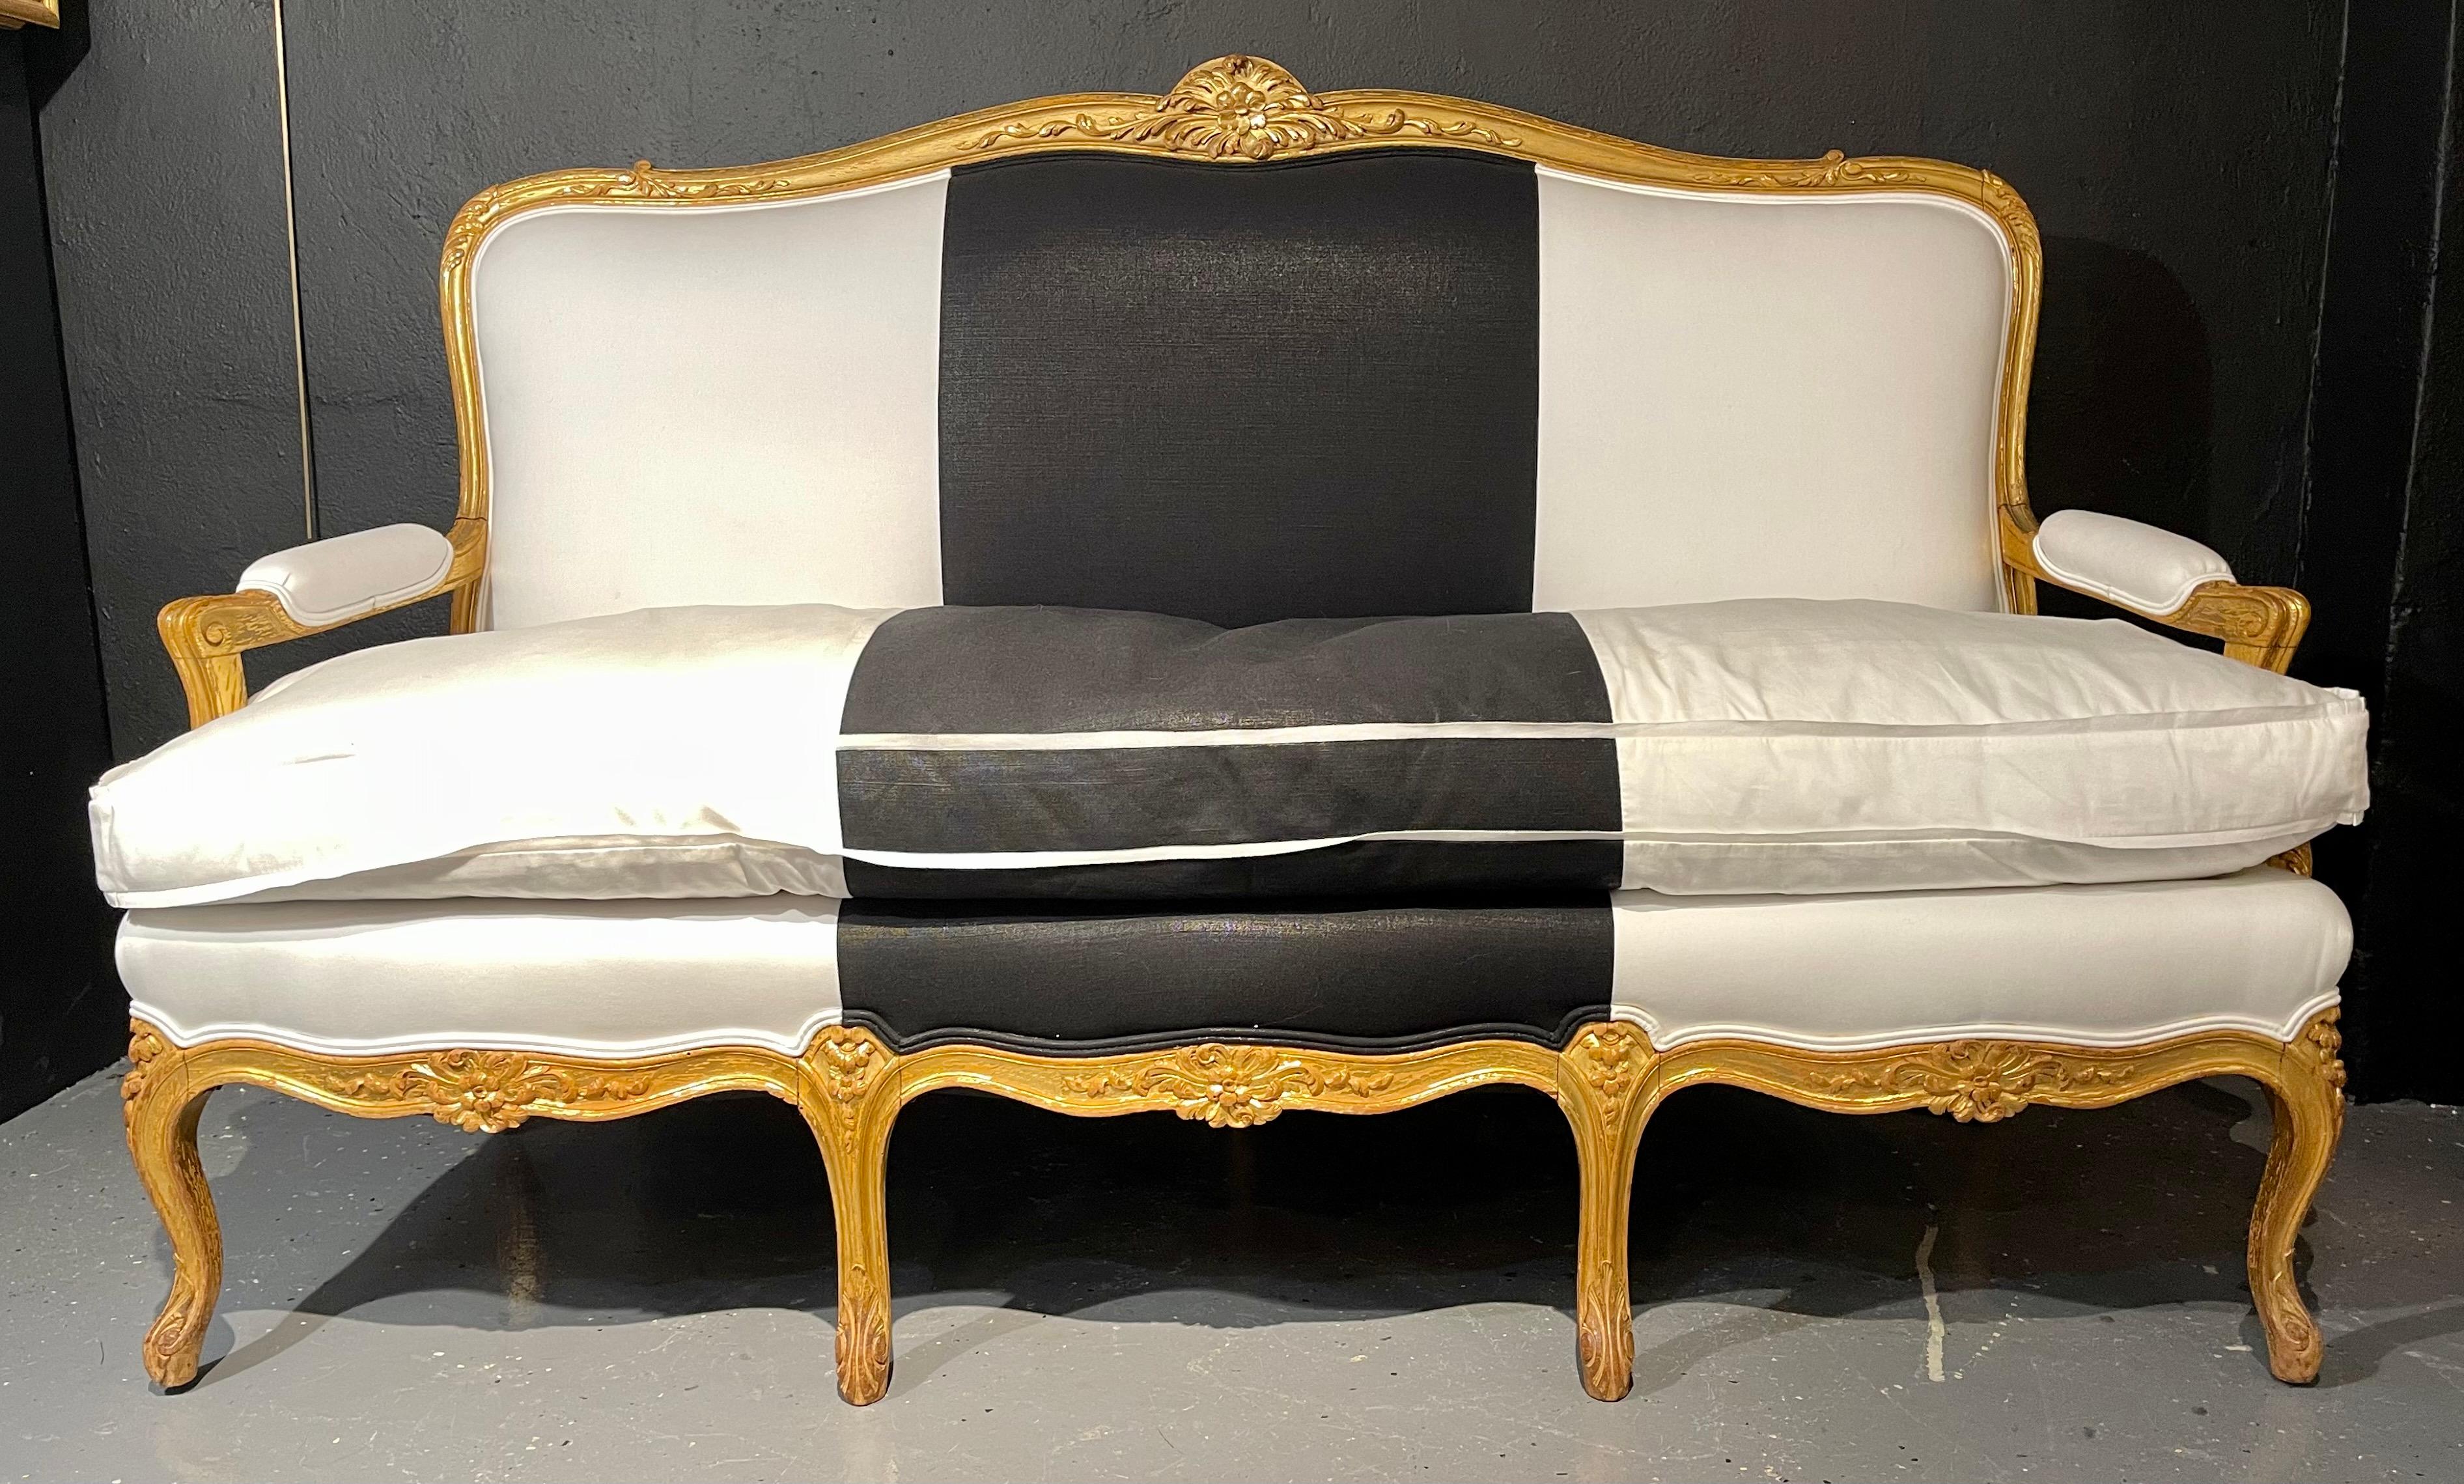 1920s French gilt wood upholstered settee, canape or sofa in black and white polished cotton. One of a compatible pair of finely carved and detailed water gilt decorated Louis XV style canapes or loveseat sofas.
A simply stunning compatible pair